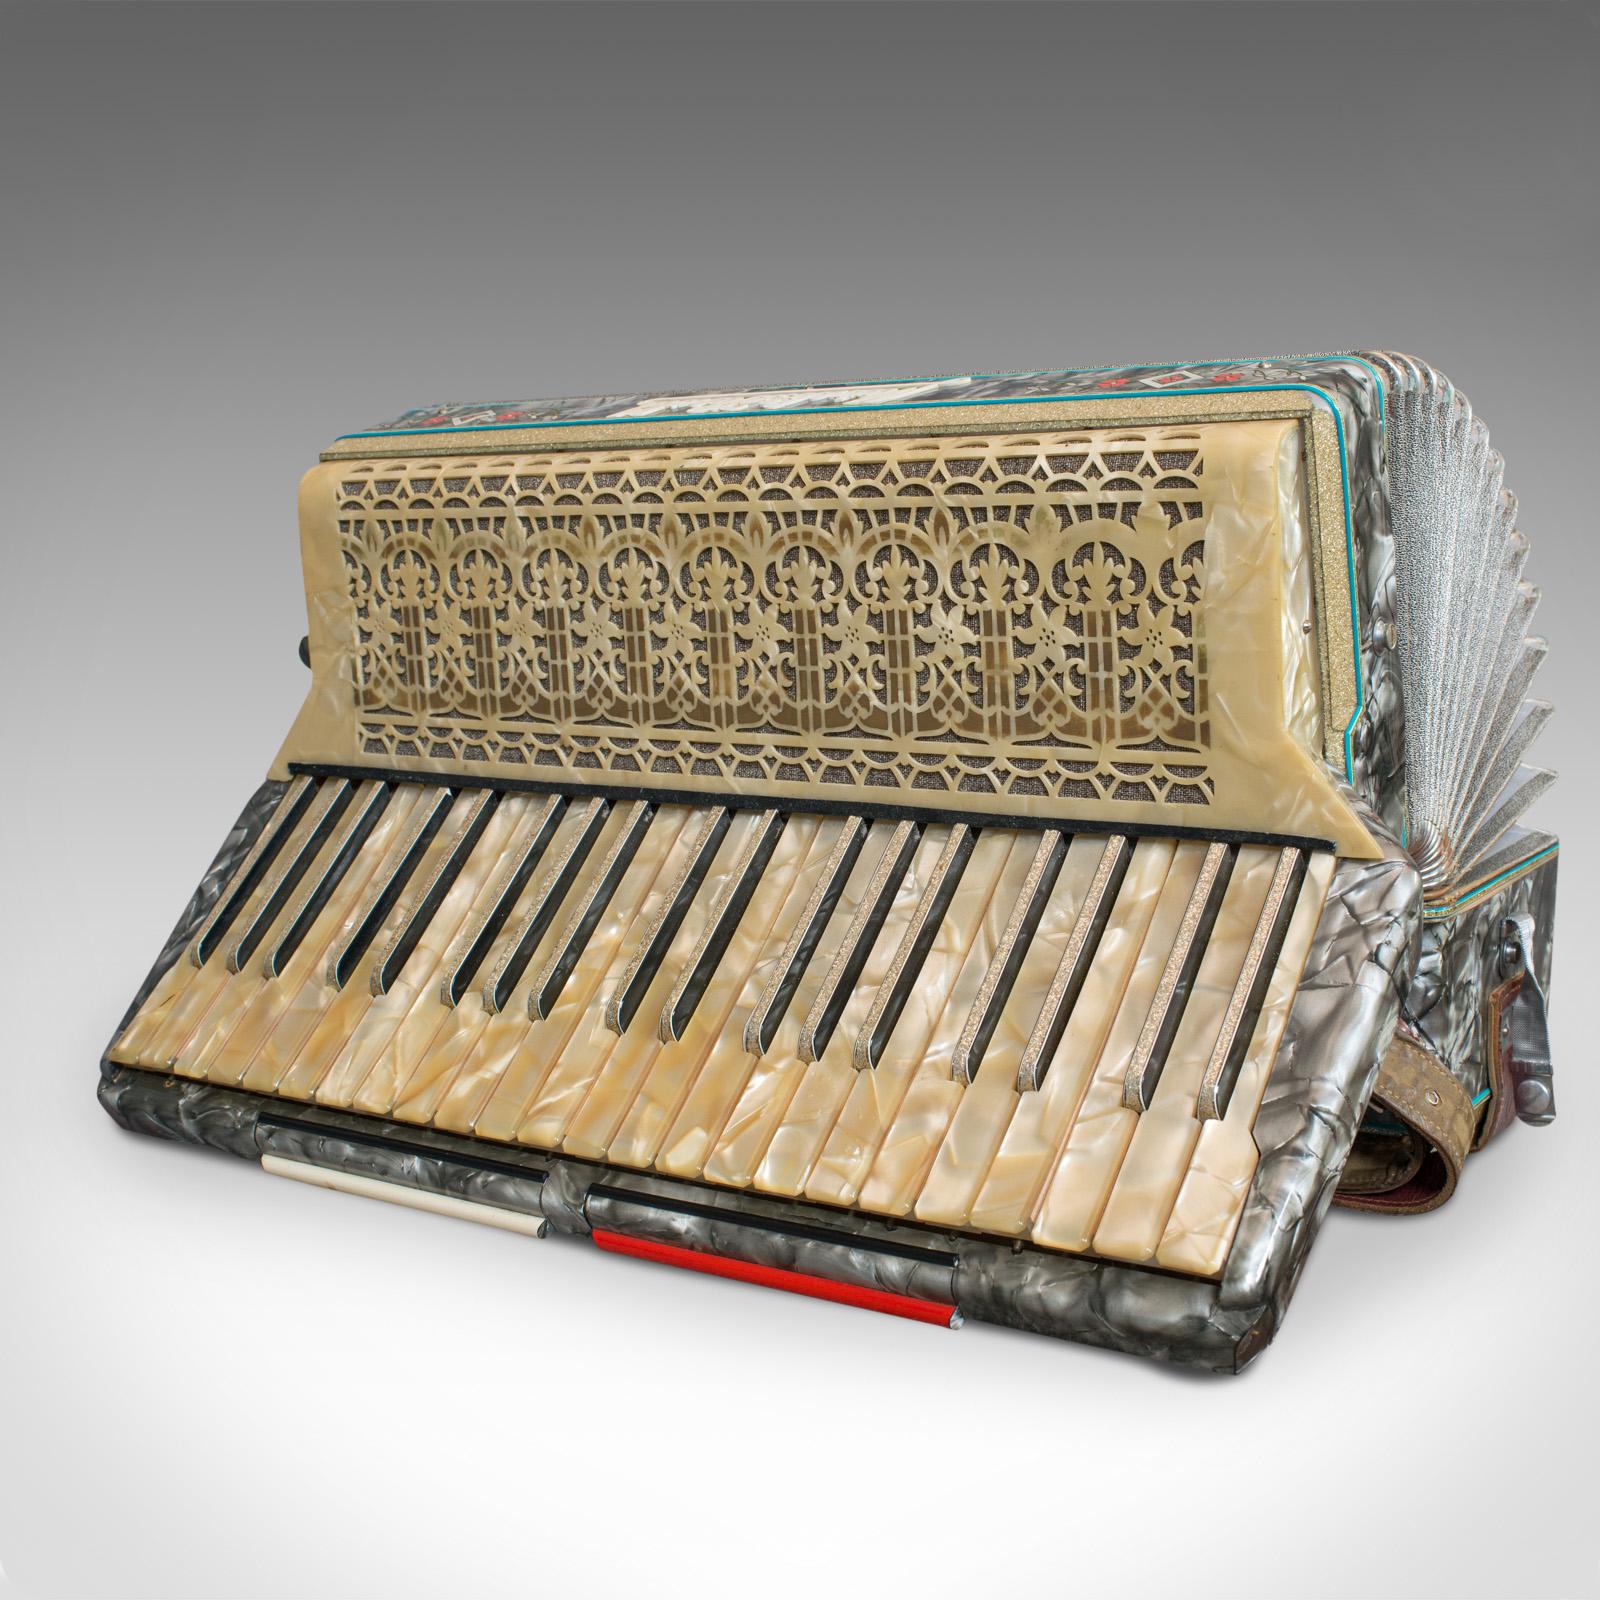 Brass Vintage Piano Accordion, German, Squeezebox, Meinel and Herold, Dix Reeds For Sale